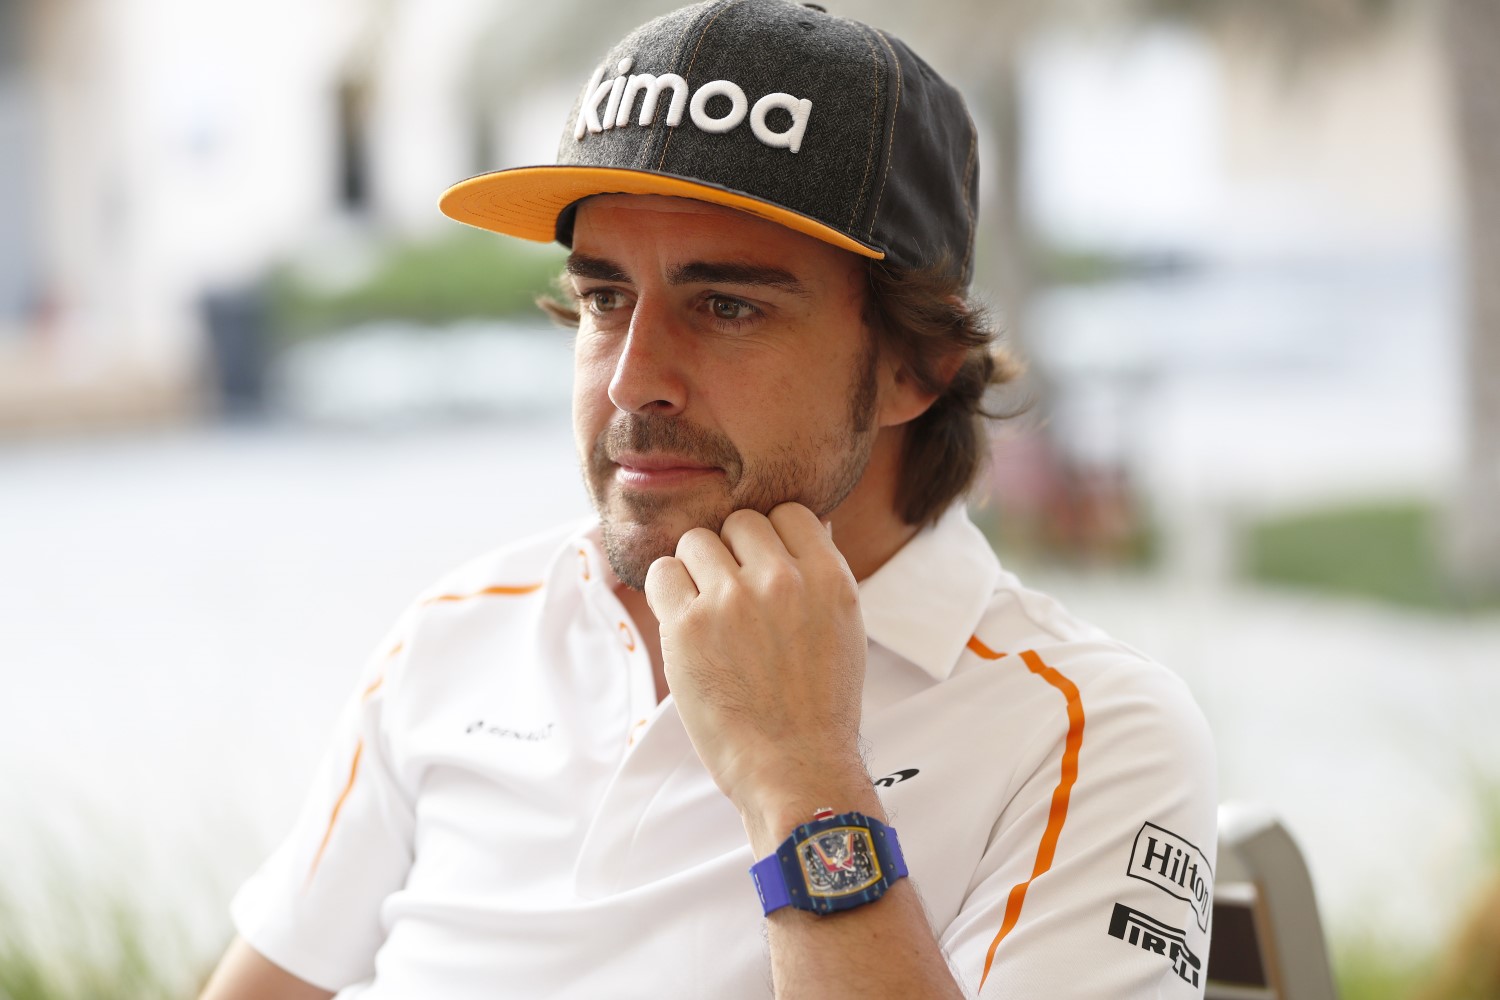 Alonso not saying much about Goss